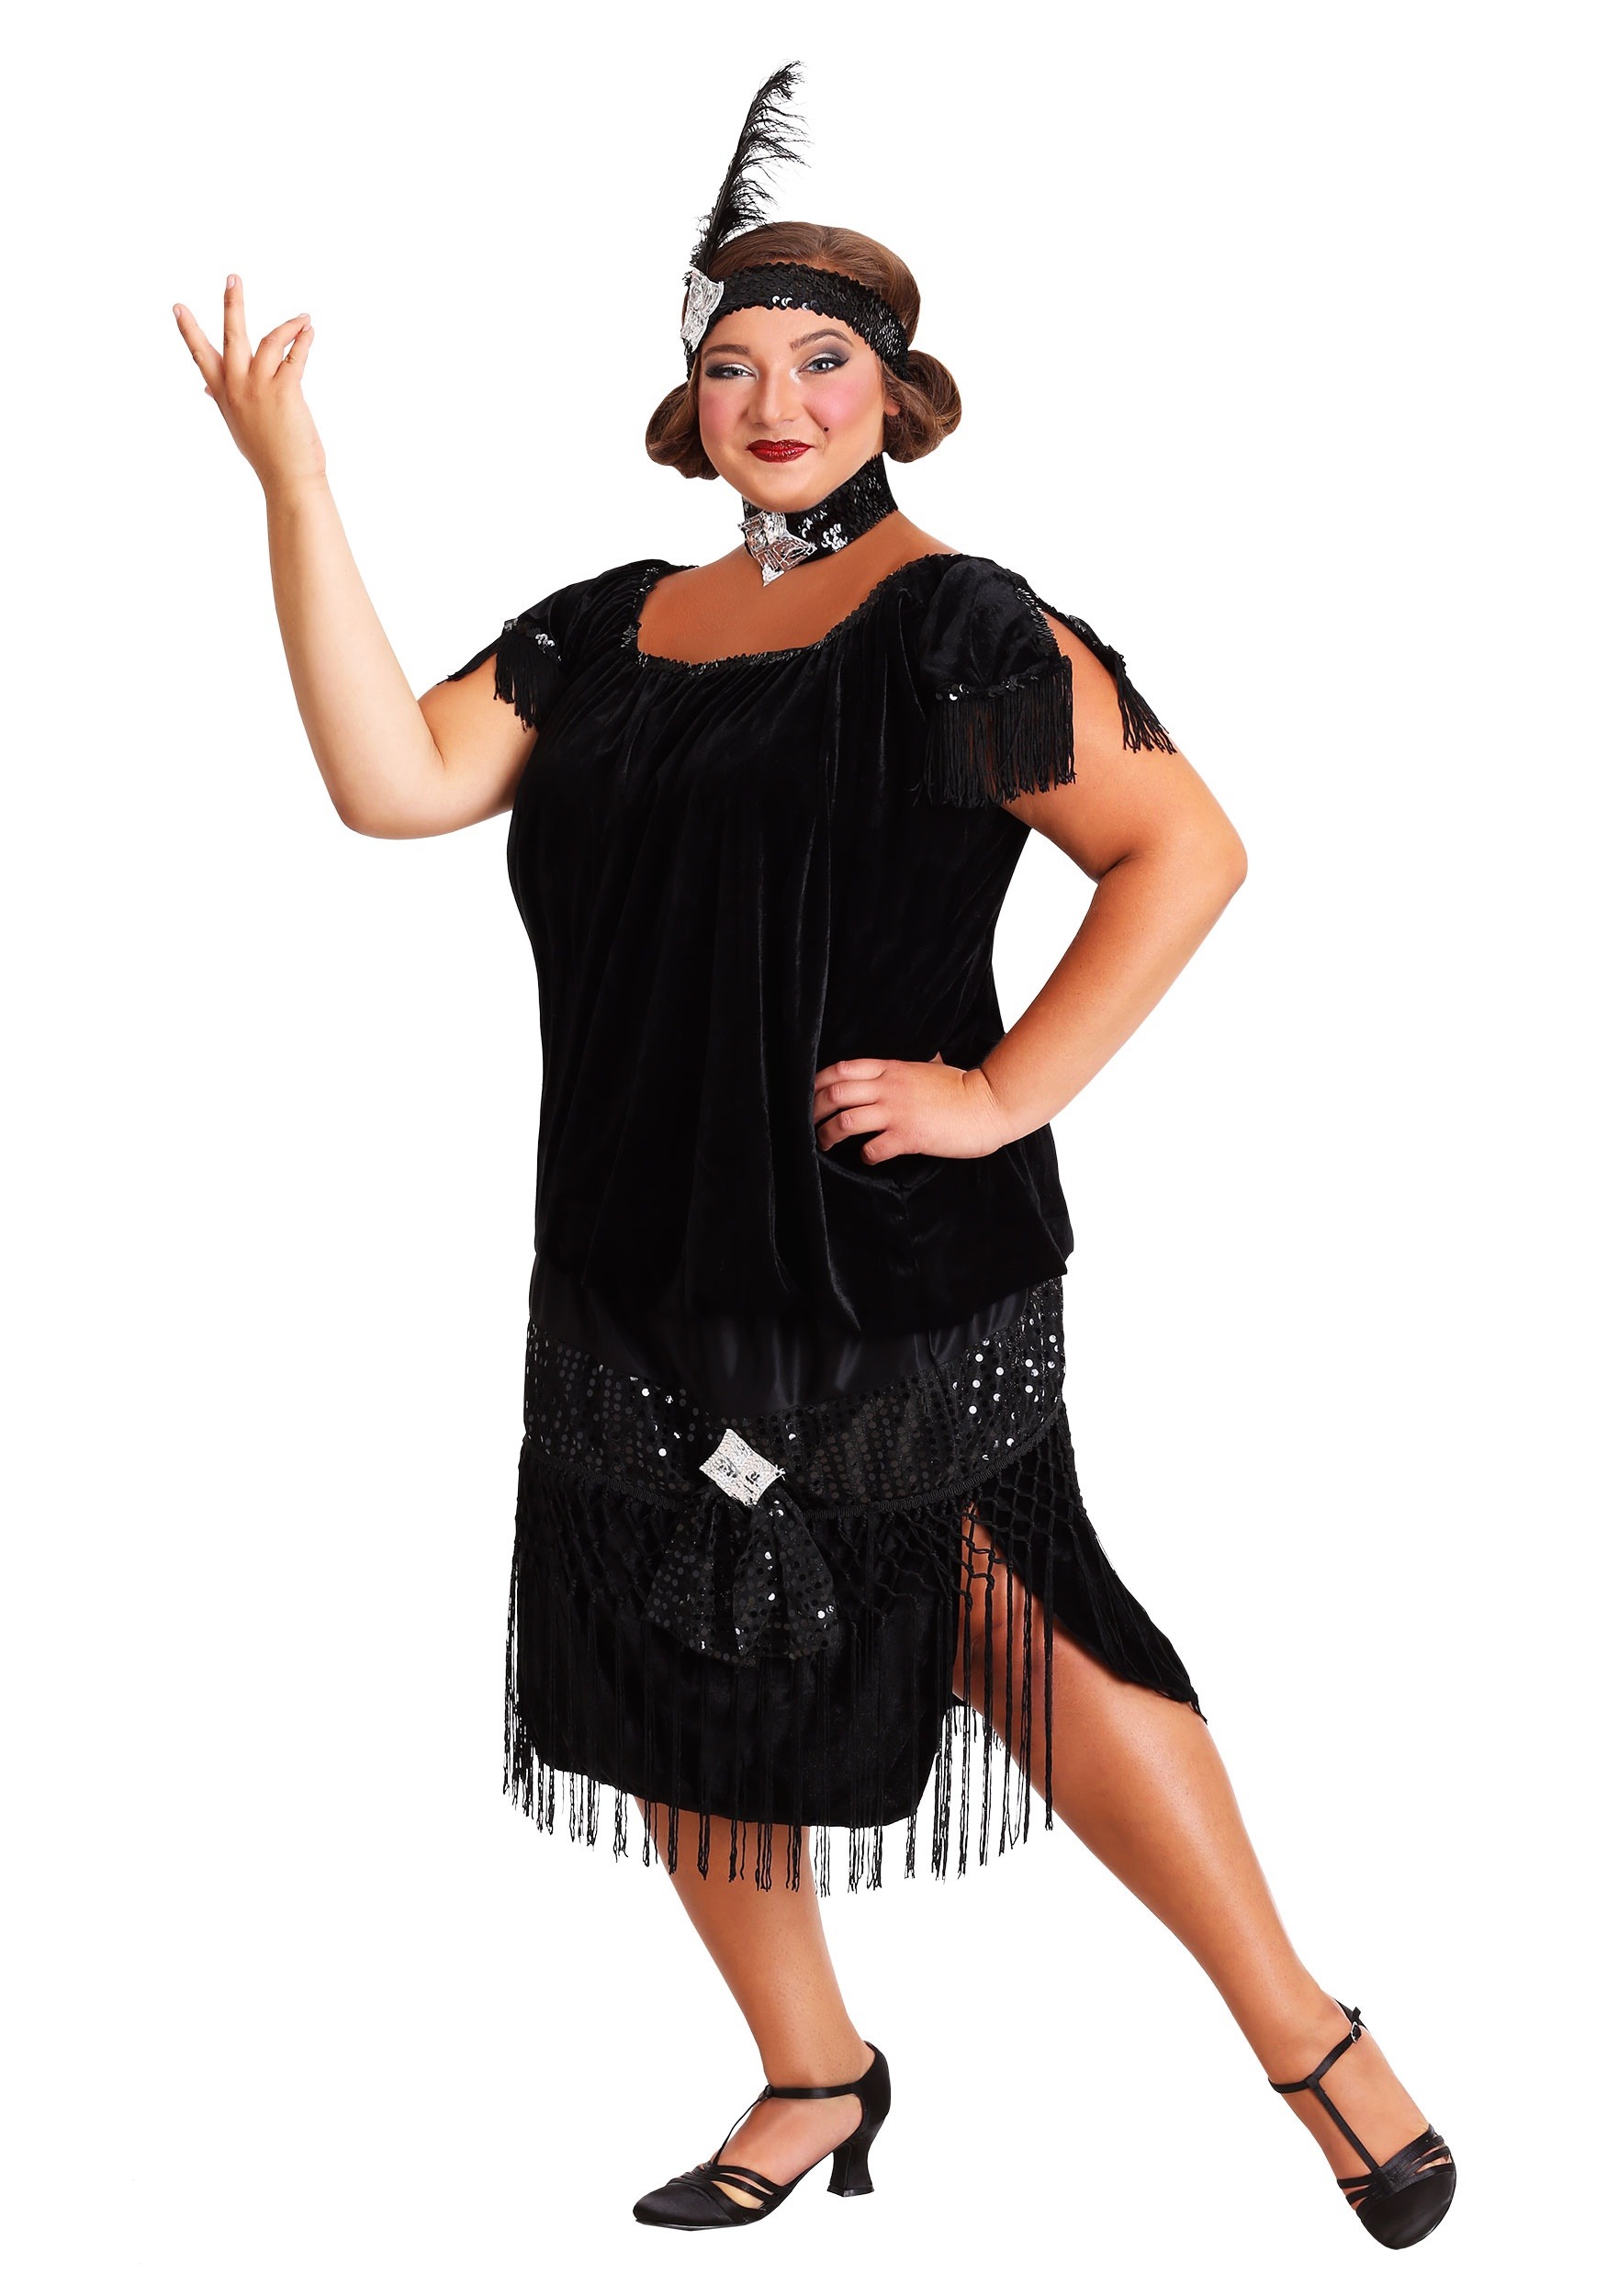 Photos - Fancy Dress FUN Costumes Deluxe Black Flapper Plus Size Costume for Women | 20s Decade